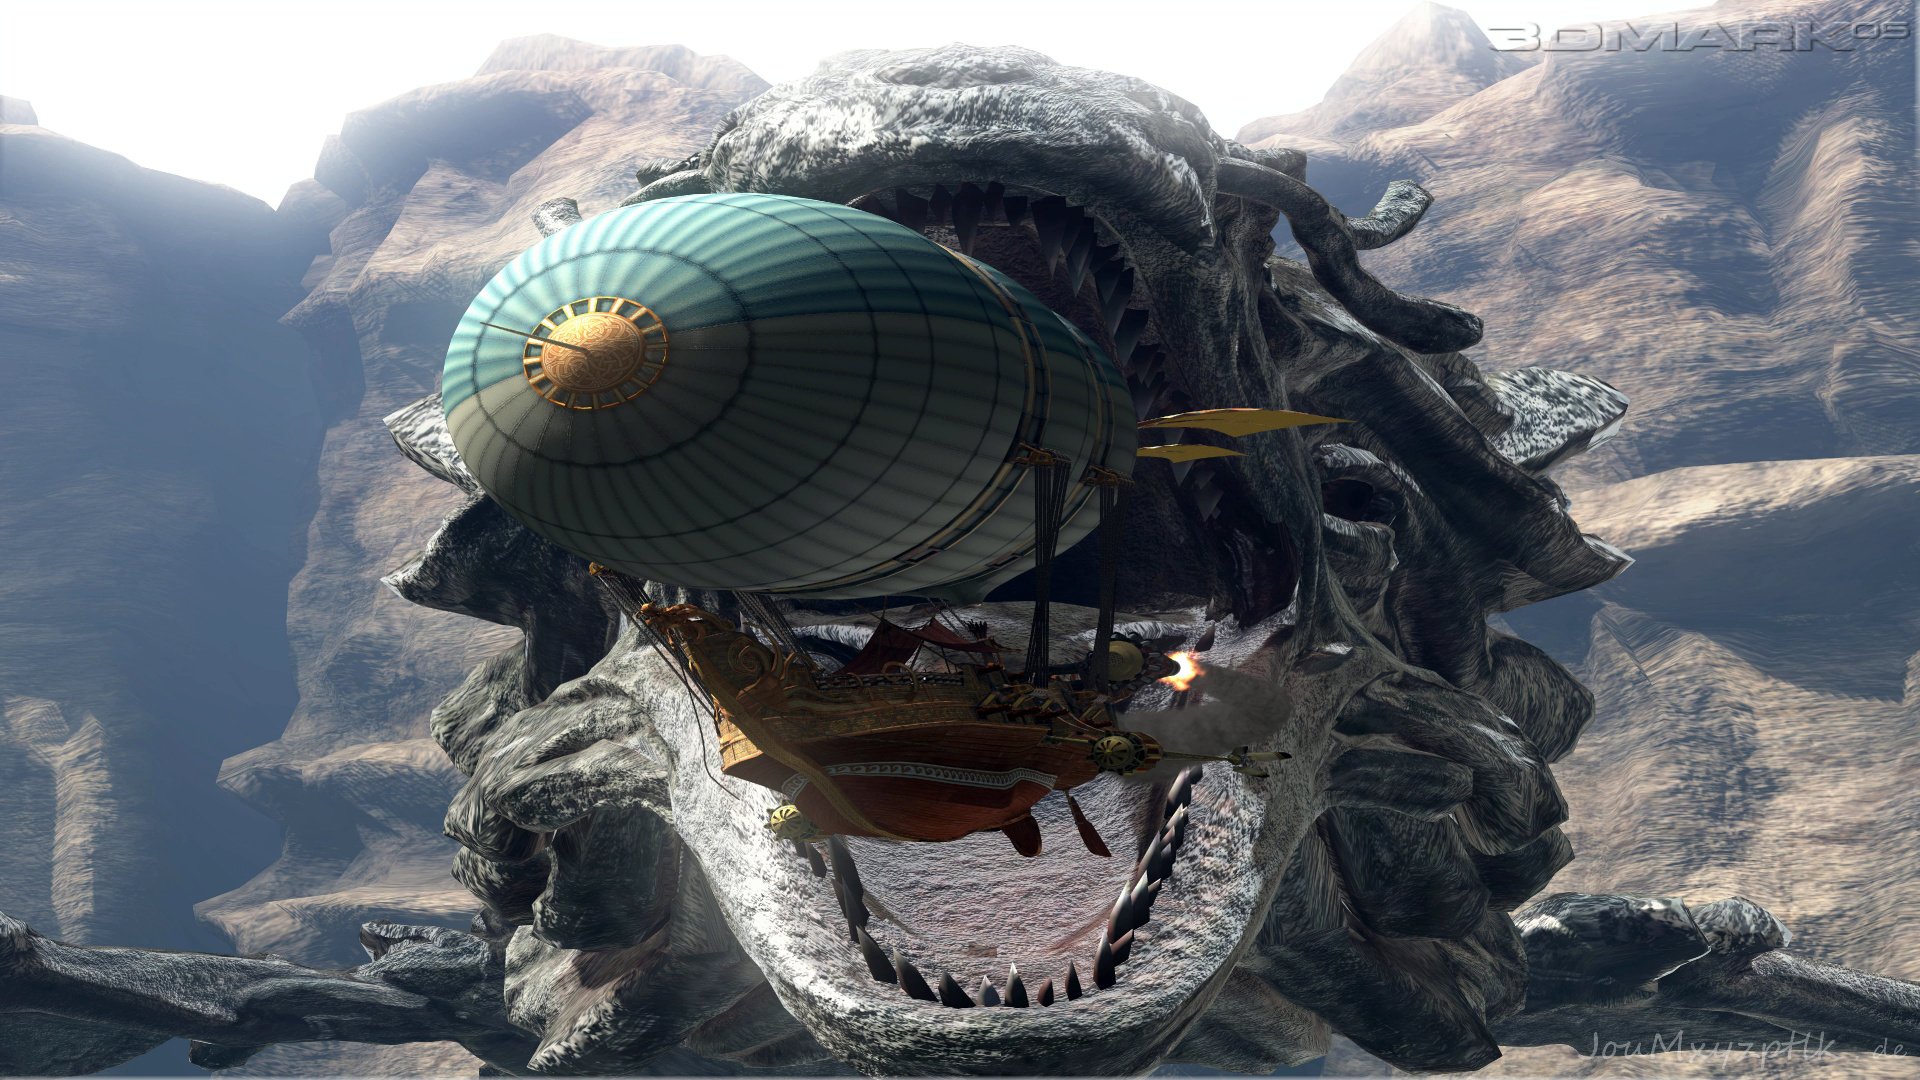 Video Games, Rigid Airship, Flying Objects. Wallpaper in 1920x1080 Resolution